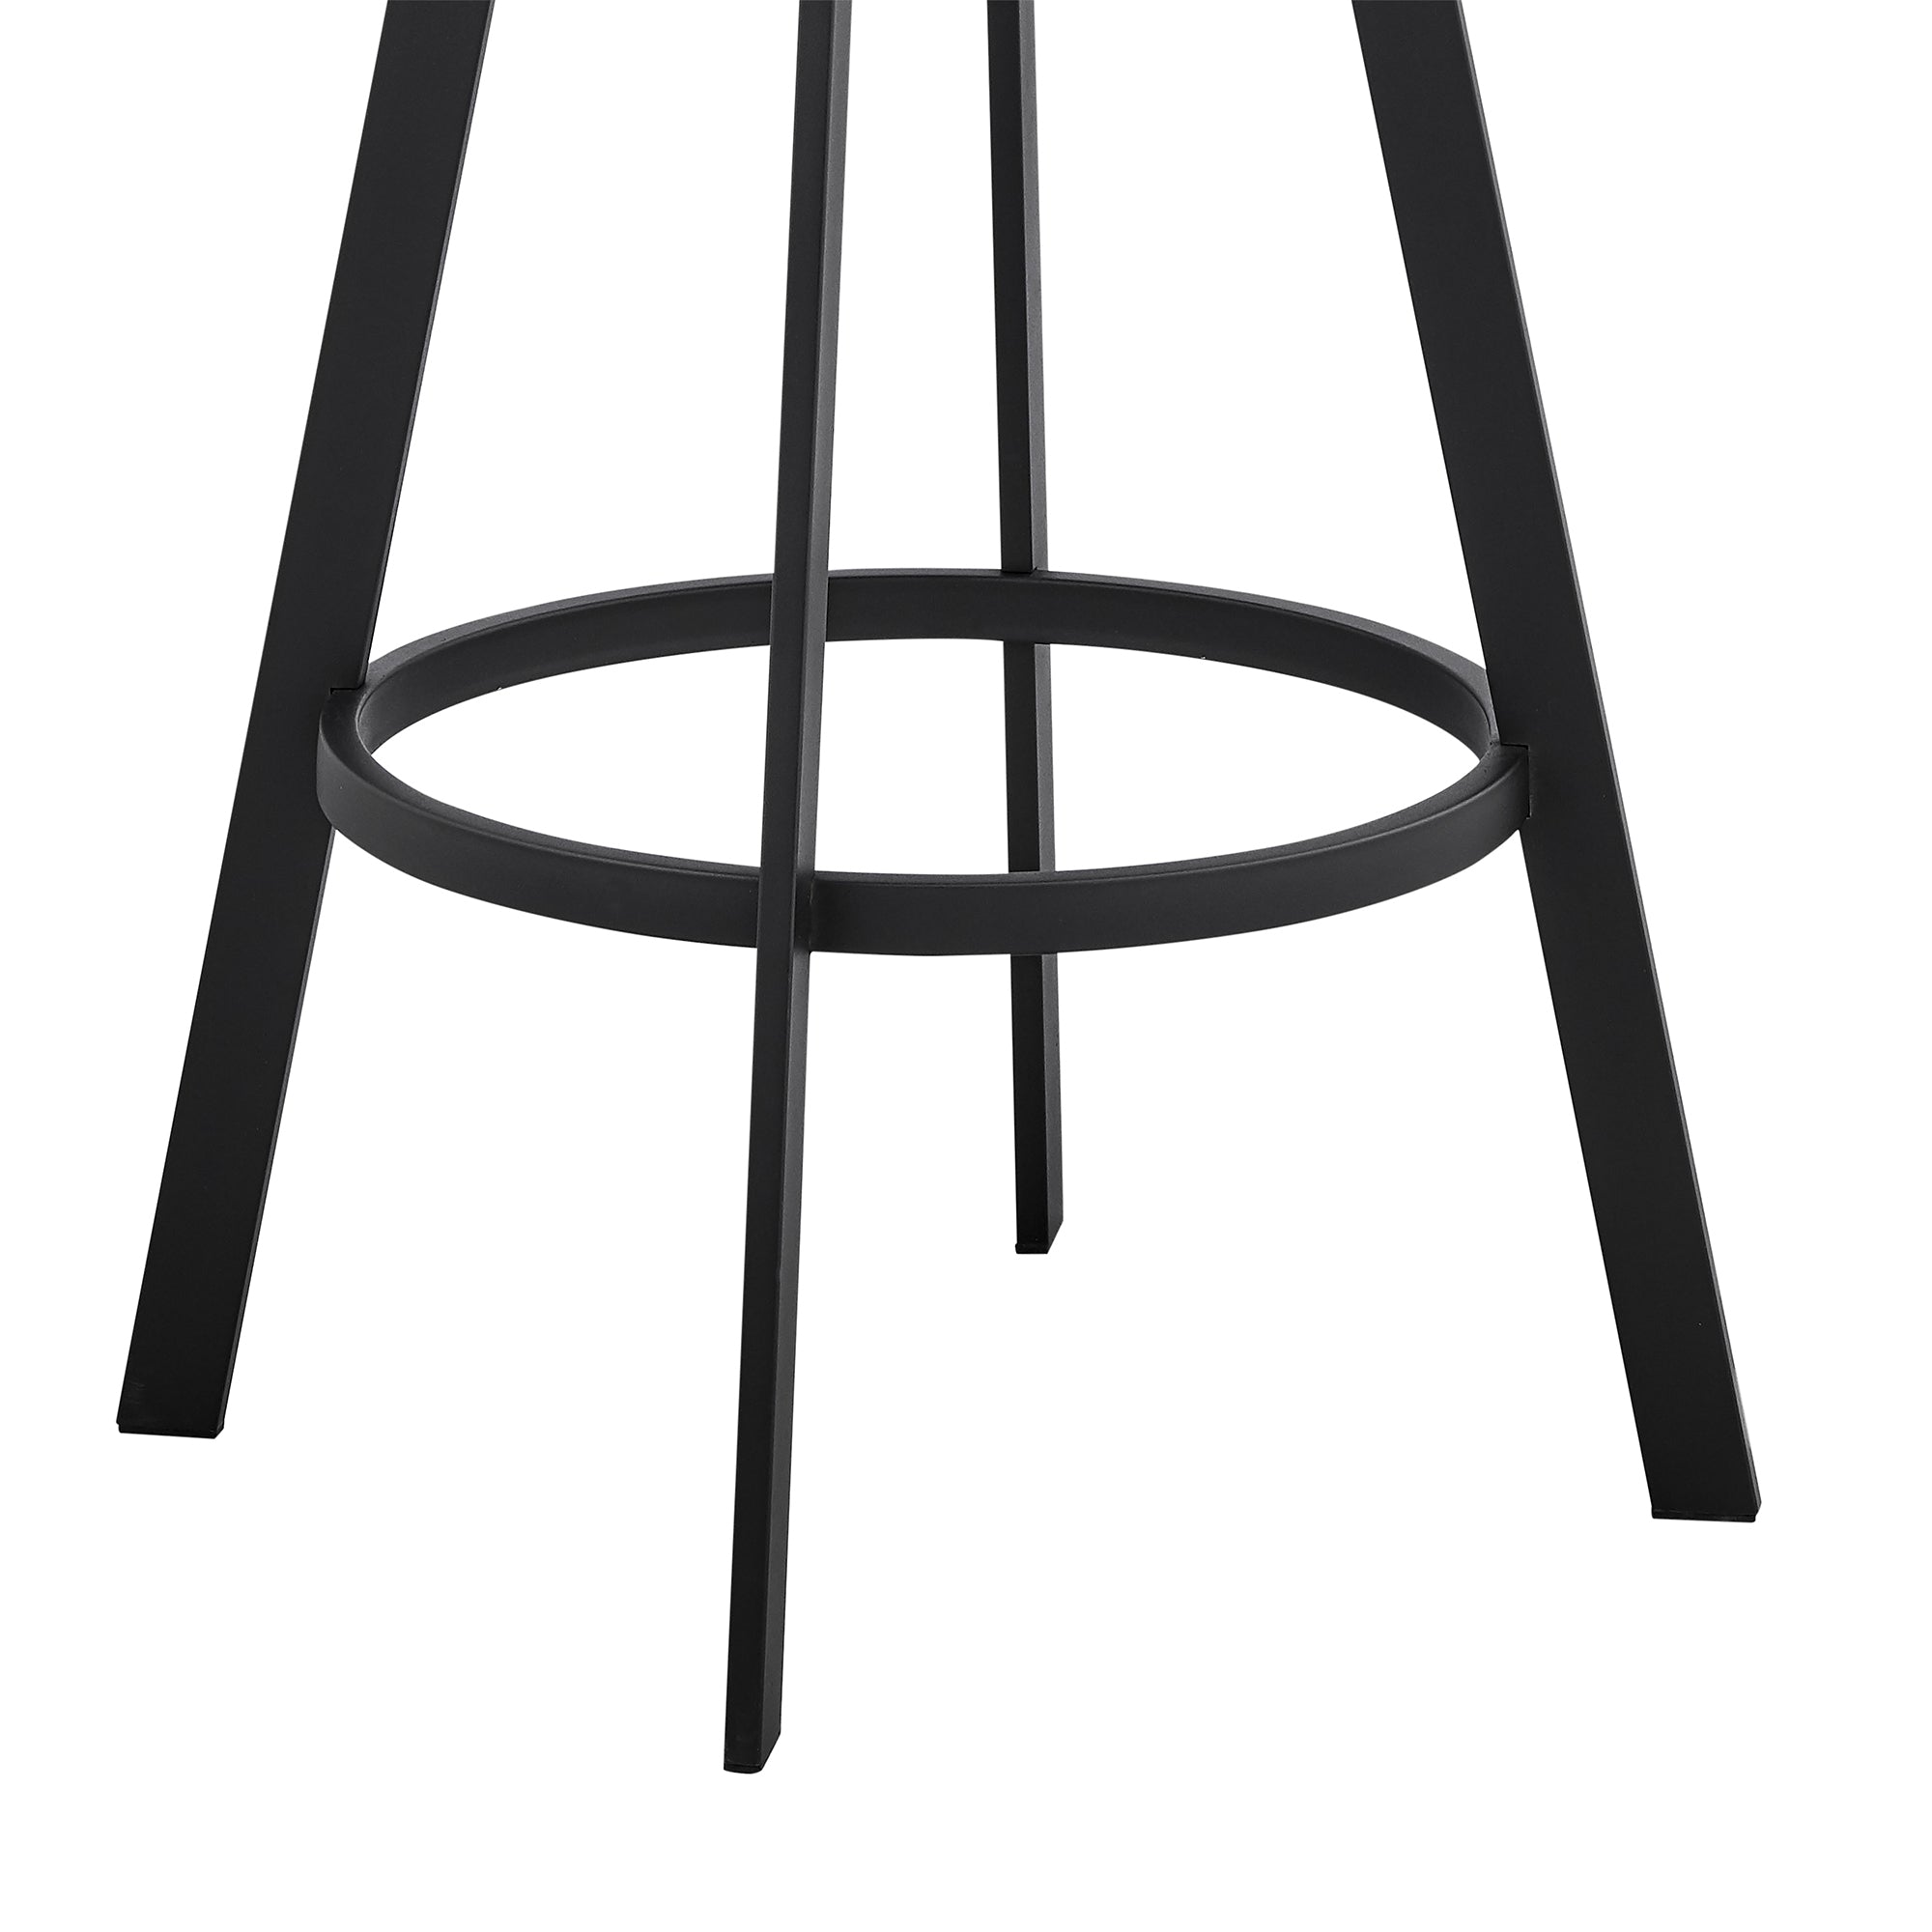 Armen Living - Dione Swivel Bar or Counter Stool in Black Faux Leather and Black Metal - 840254335028